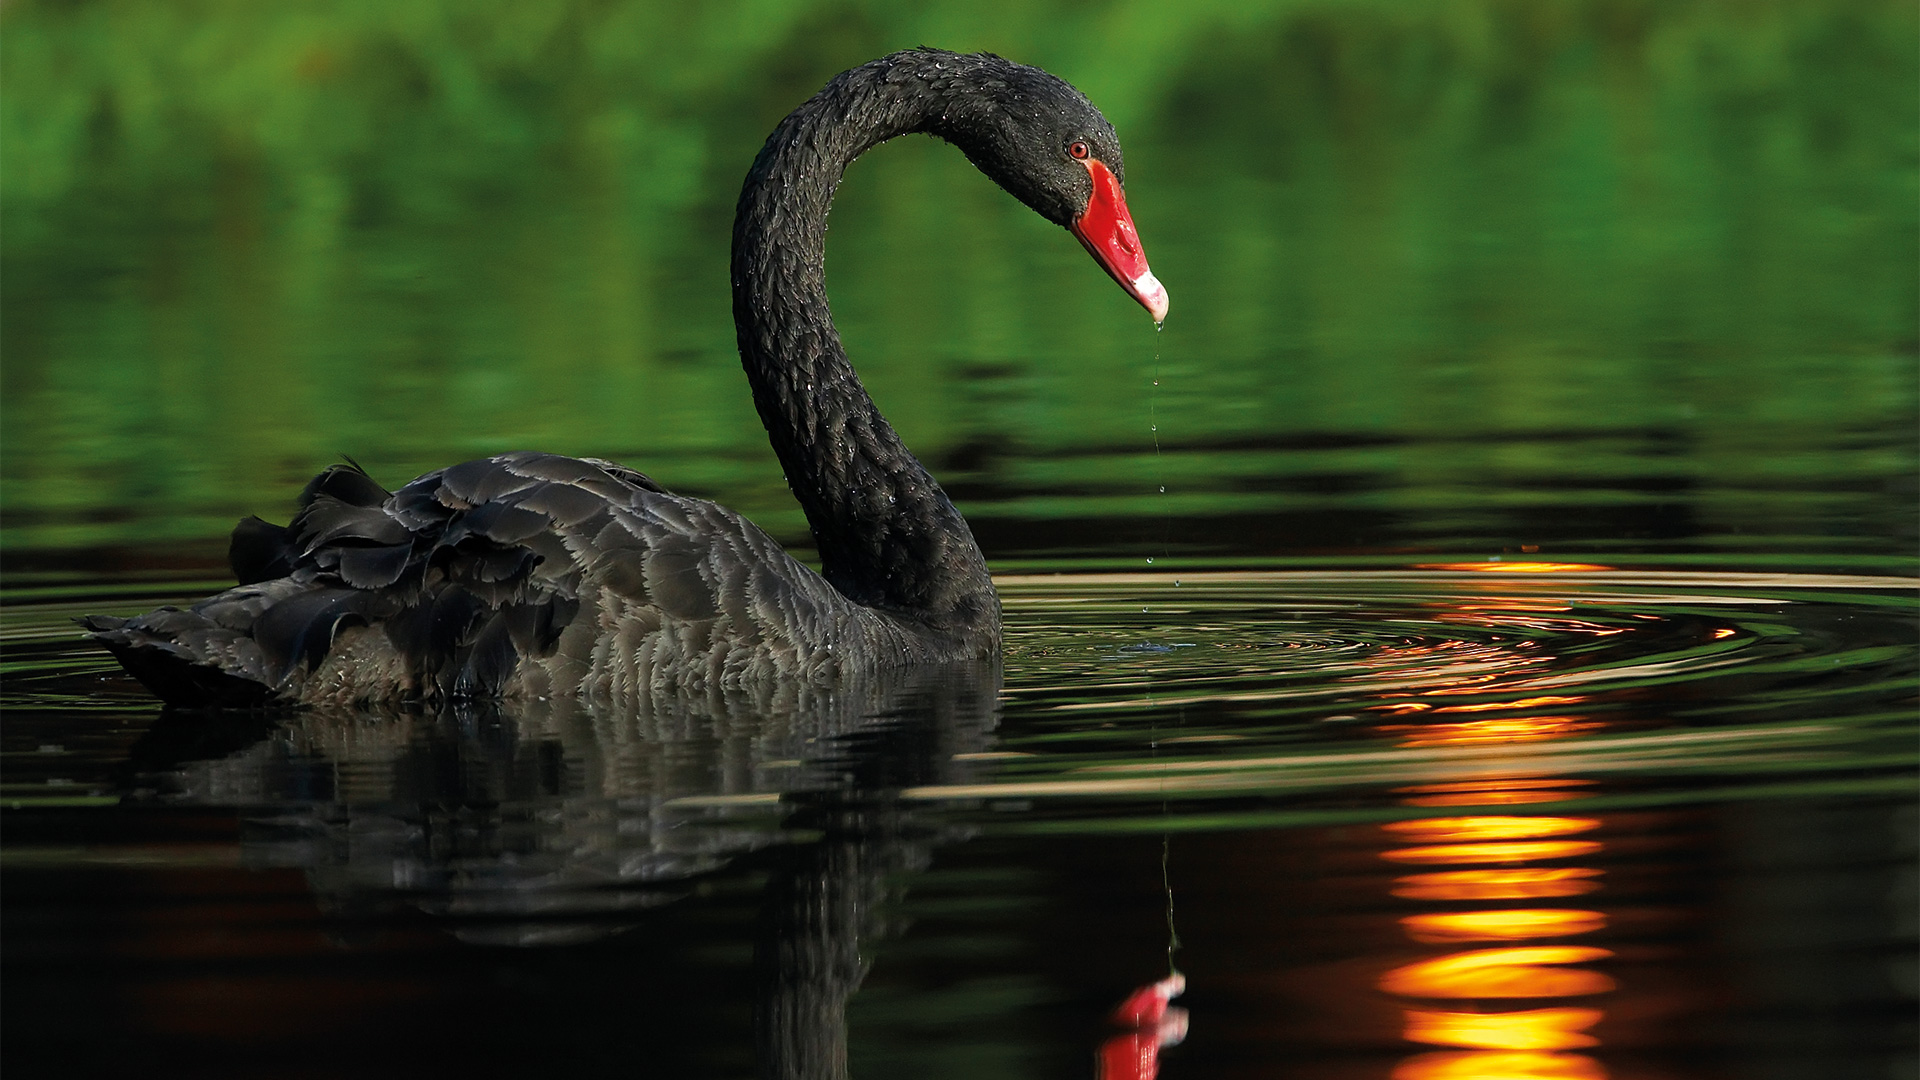 Black swan: expecting the unexpected